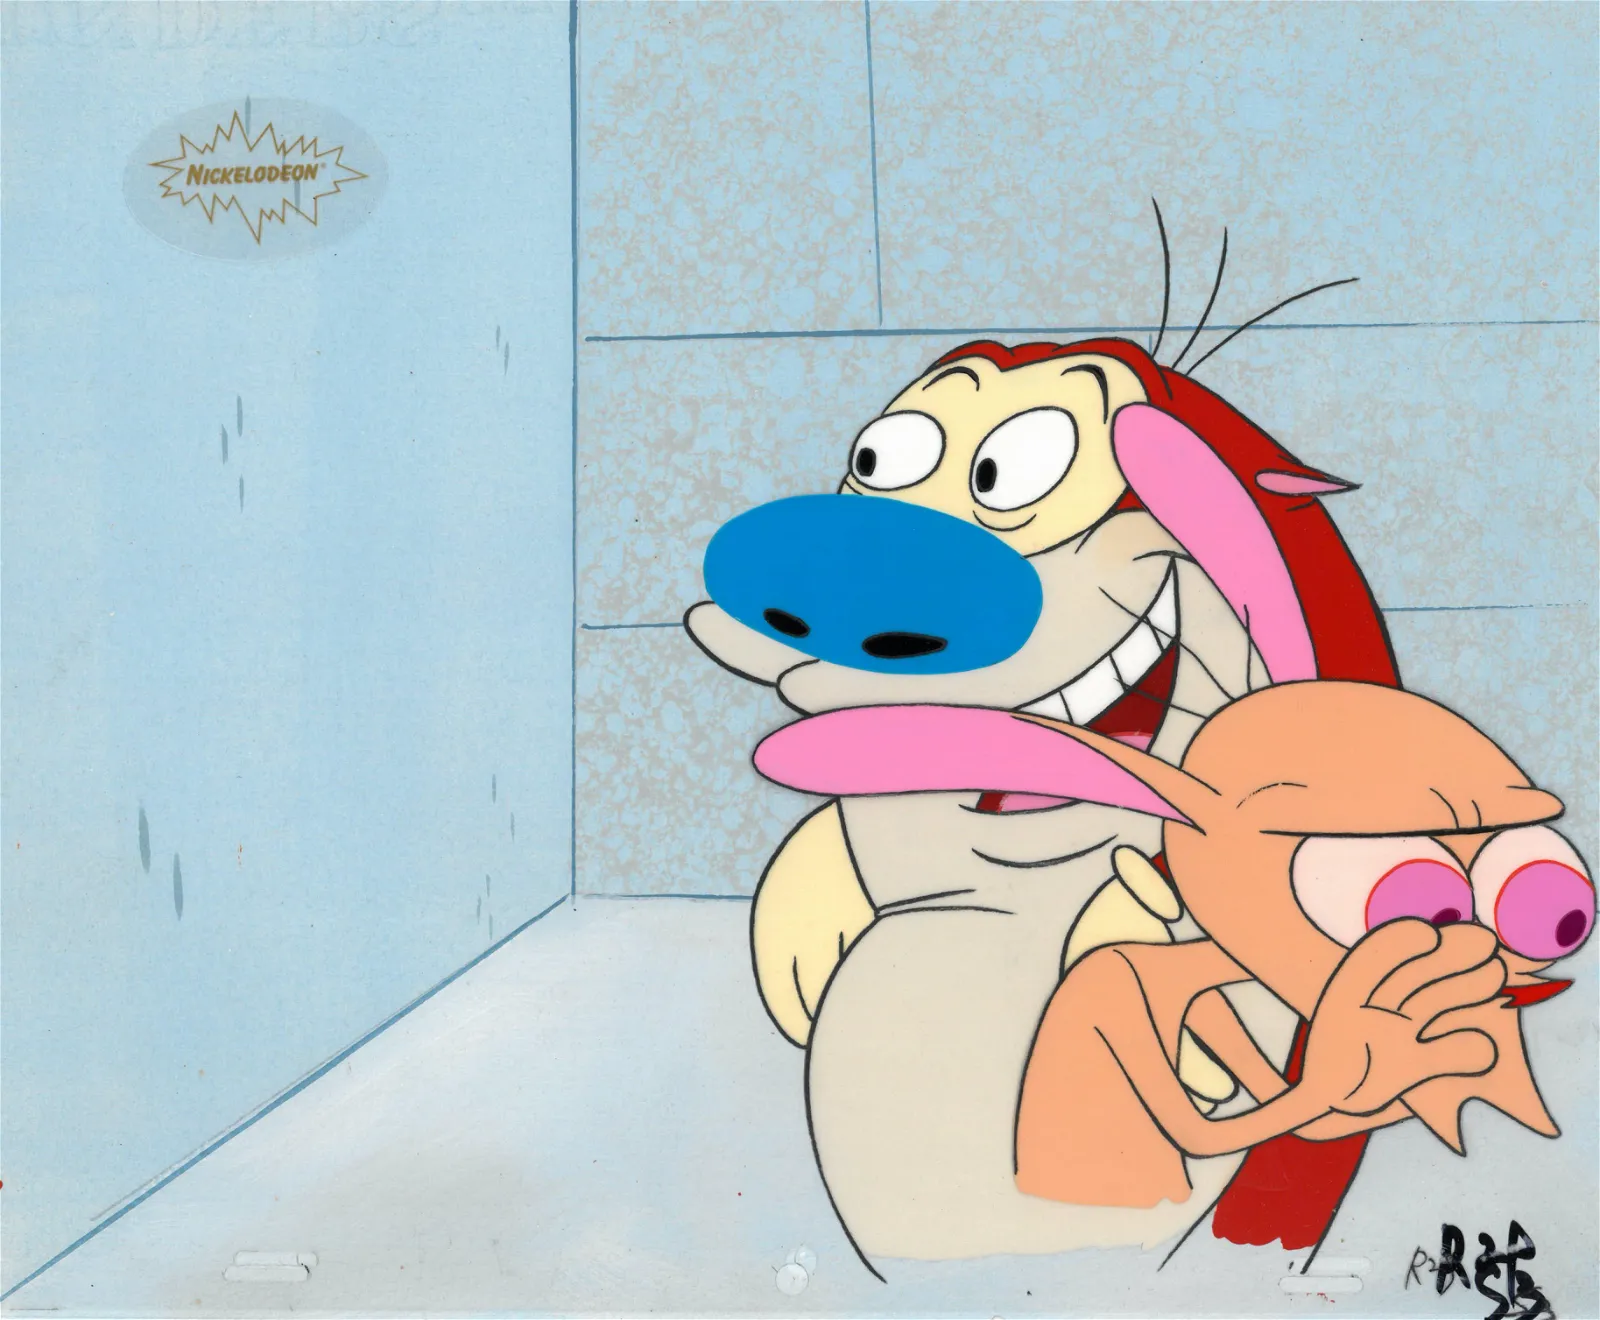 Original production cel from ‘The Ren and Stimpy Show,’ est. $200-$250